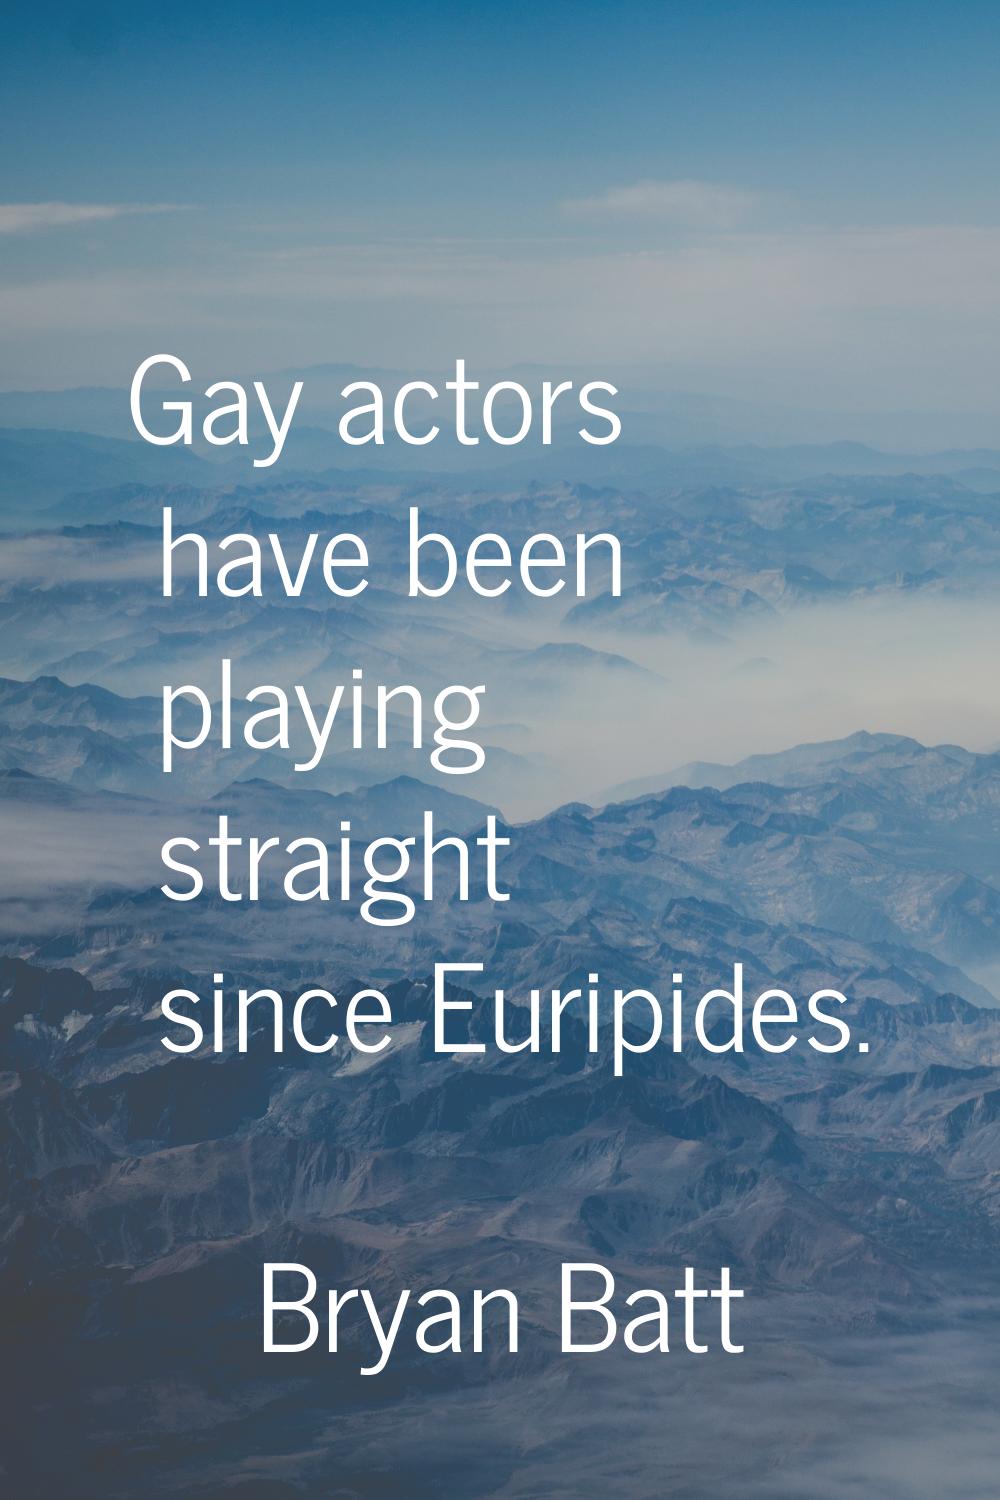 Gay actors have been playing straight since Euripides.